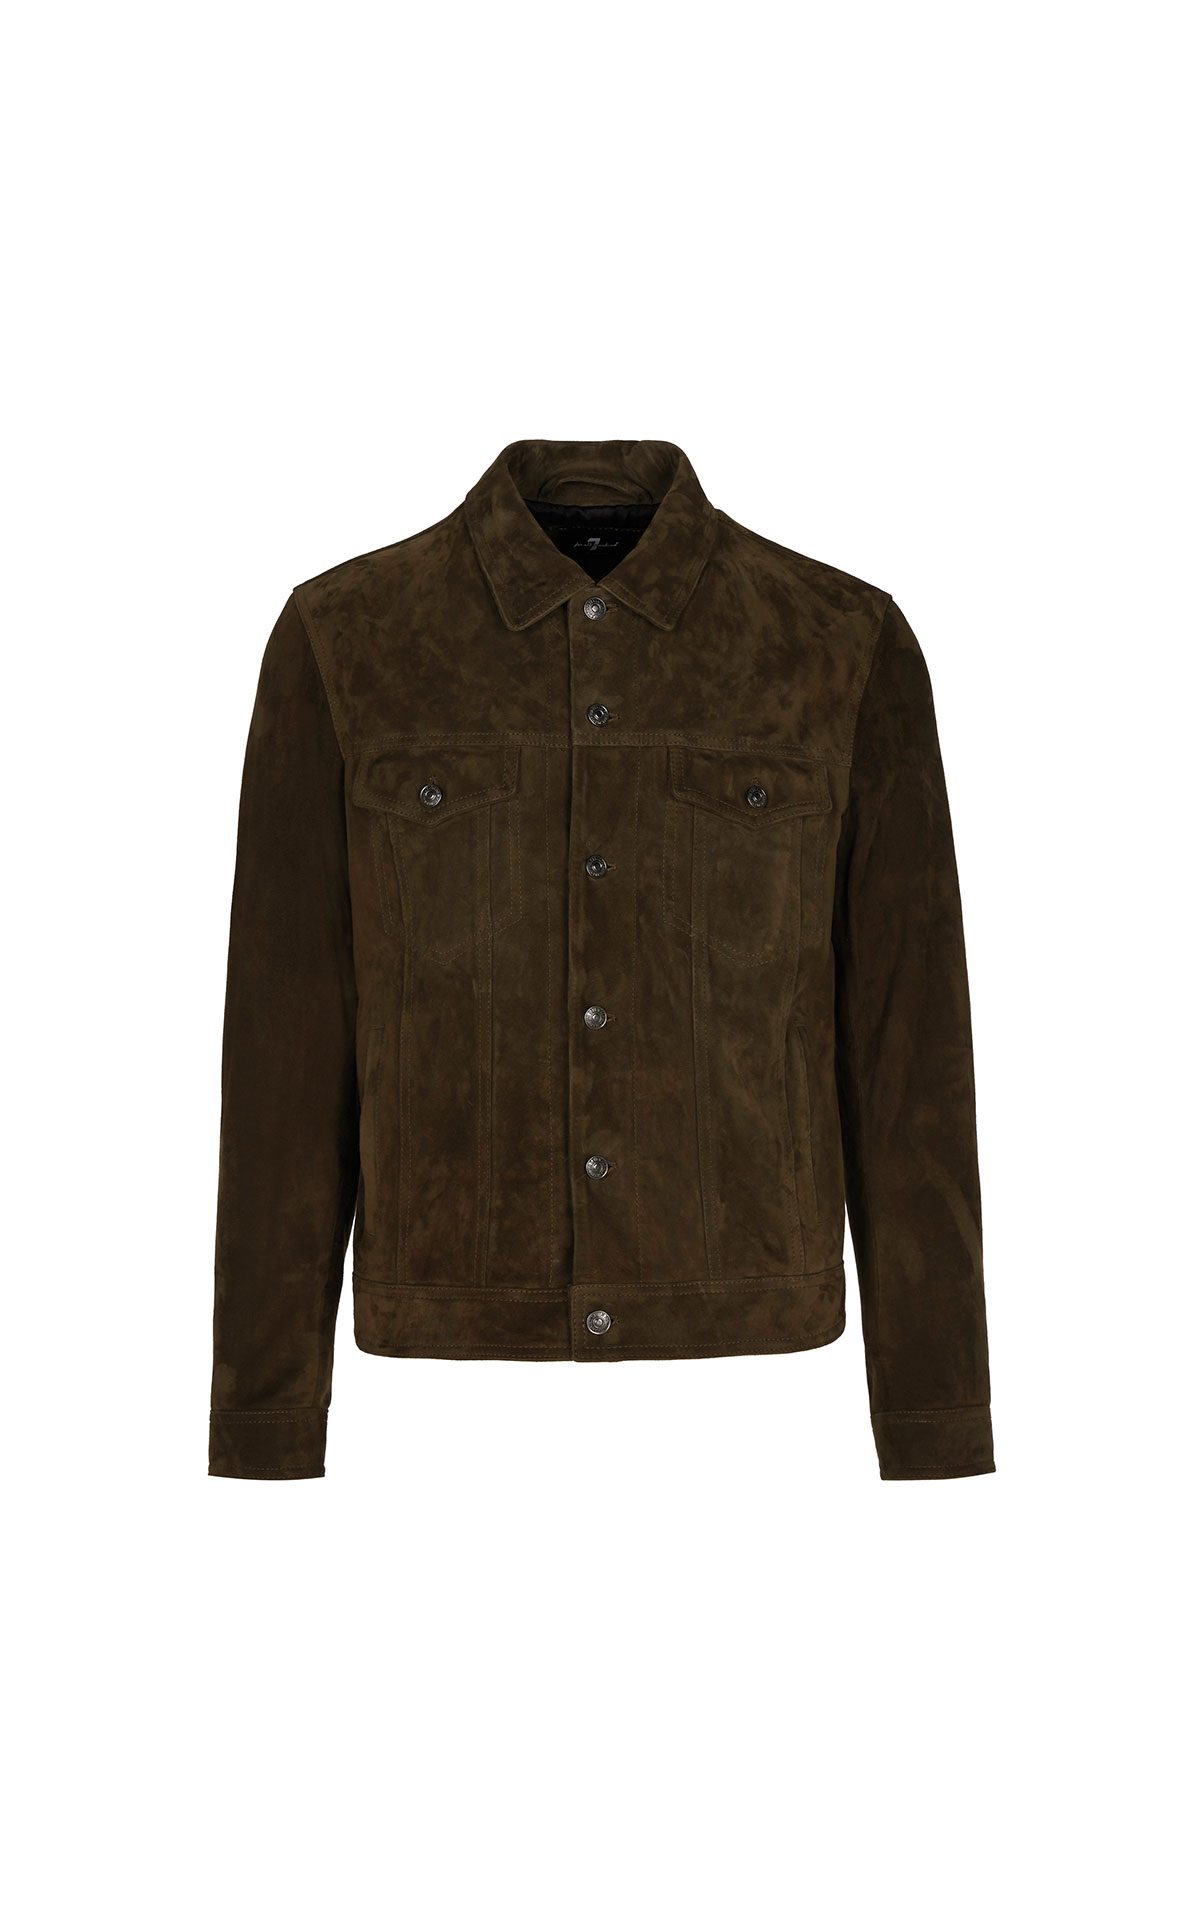 7 For all Mankind Trucker jacket suede from Bicester Village